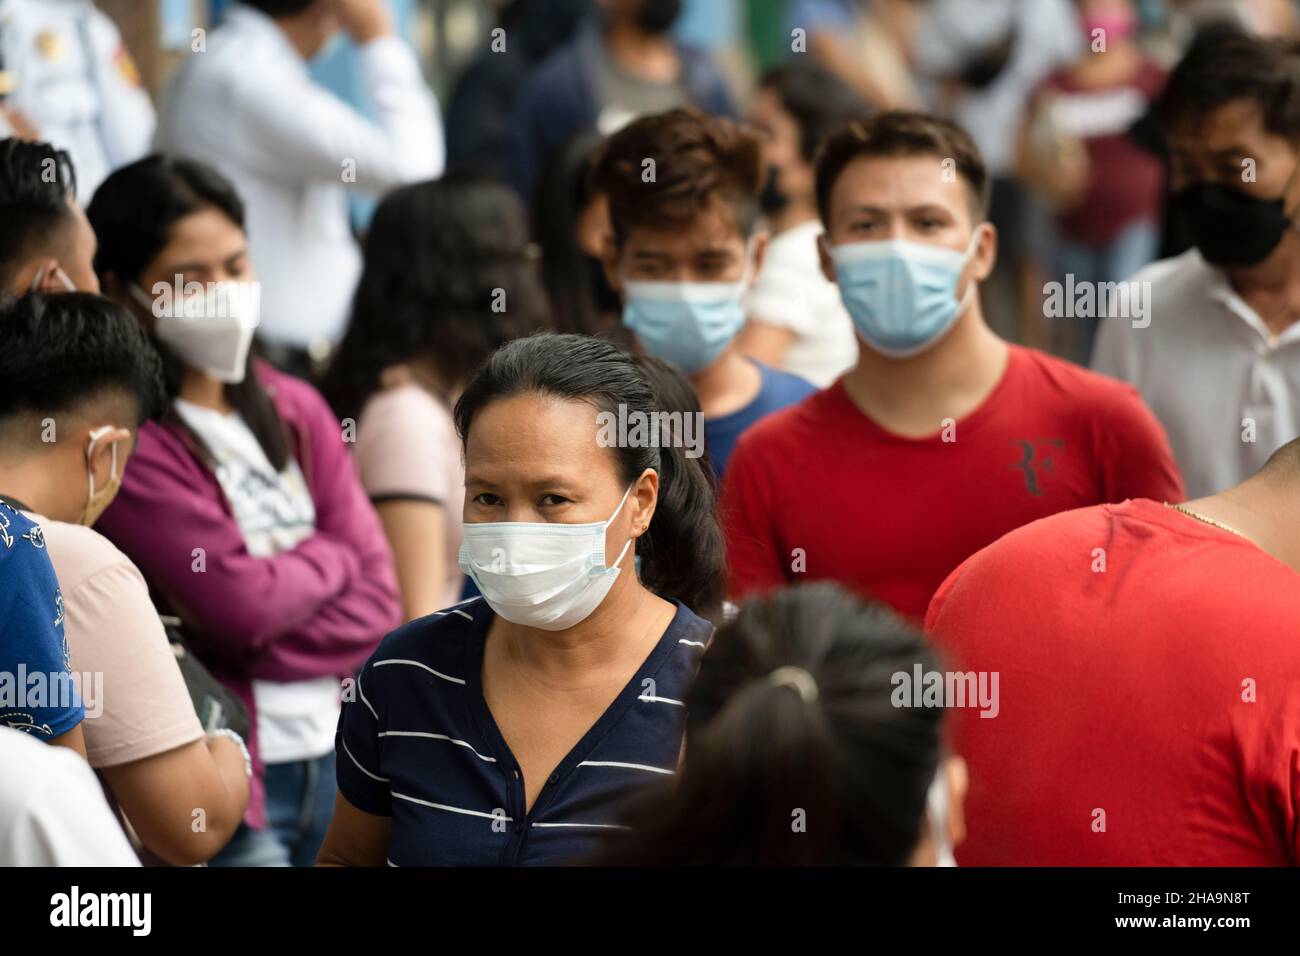 People in the Philippines walking along a street wearing face masks, the wearing of face masks in public places and establishments is mandatory. Stock Photo